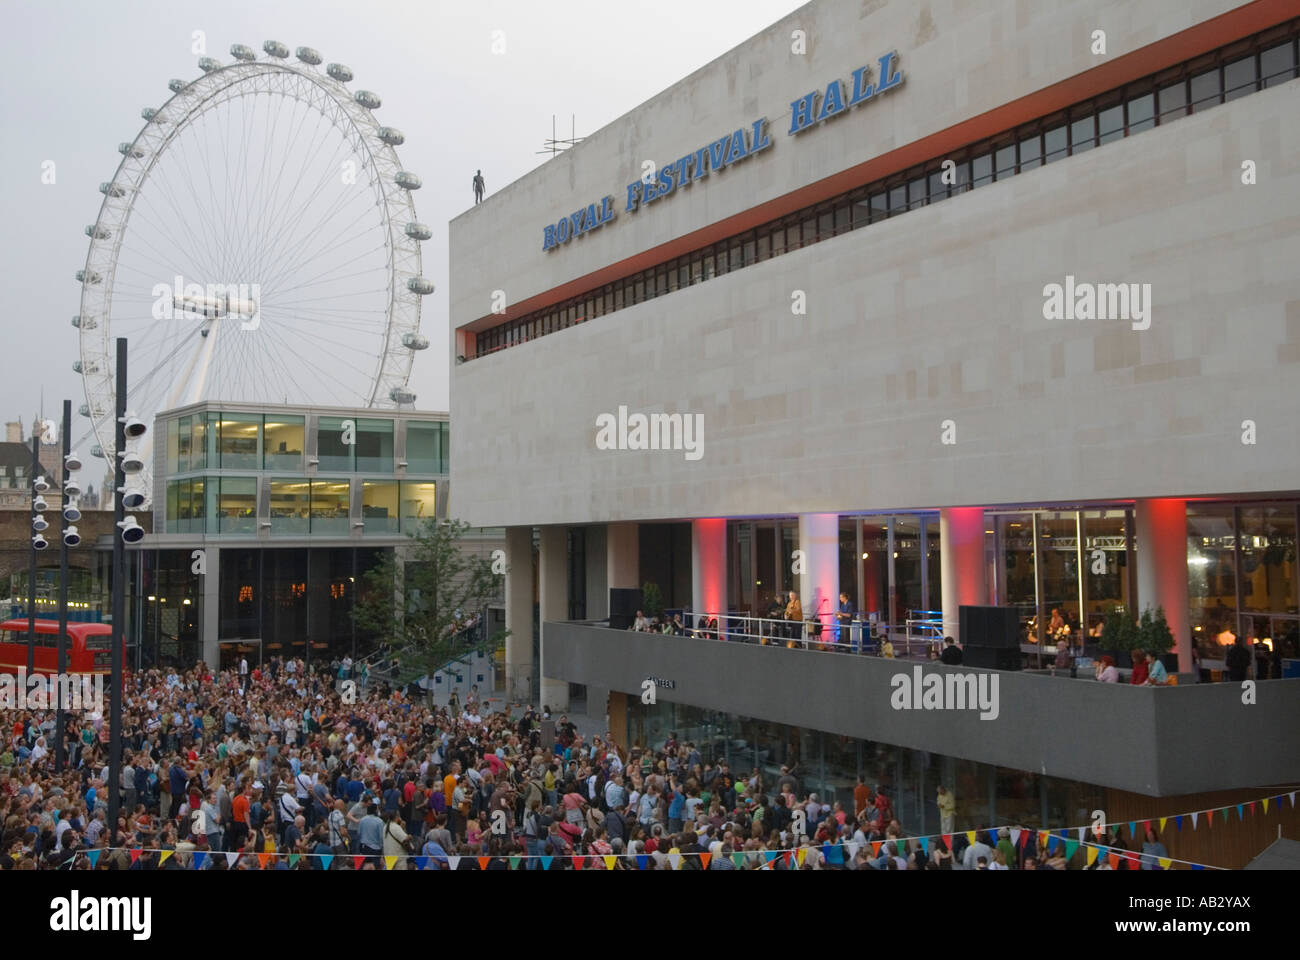 Royal Festival Hall free concert by Billy Bragg South Bank London June 9 2007 UK. Reopening  ceremony. HOMER SYKES Stock Photo